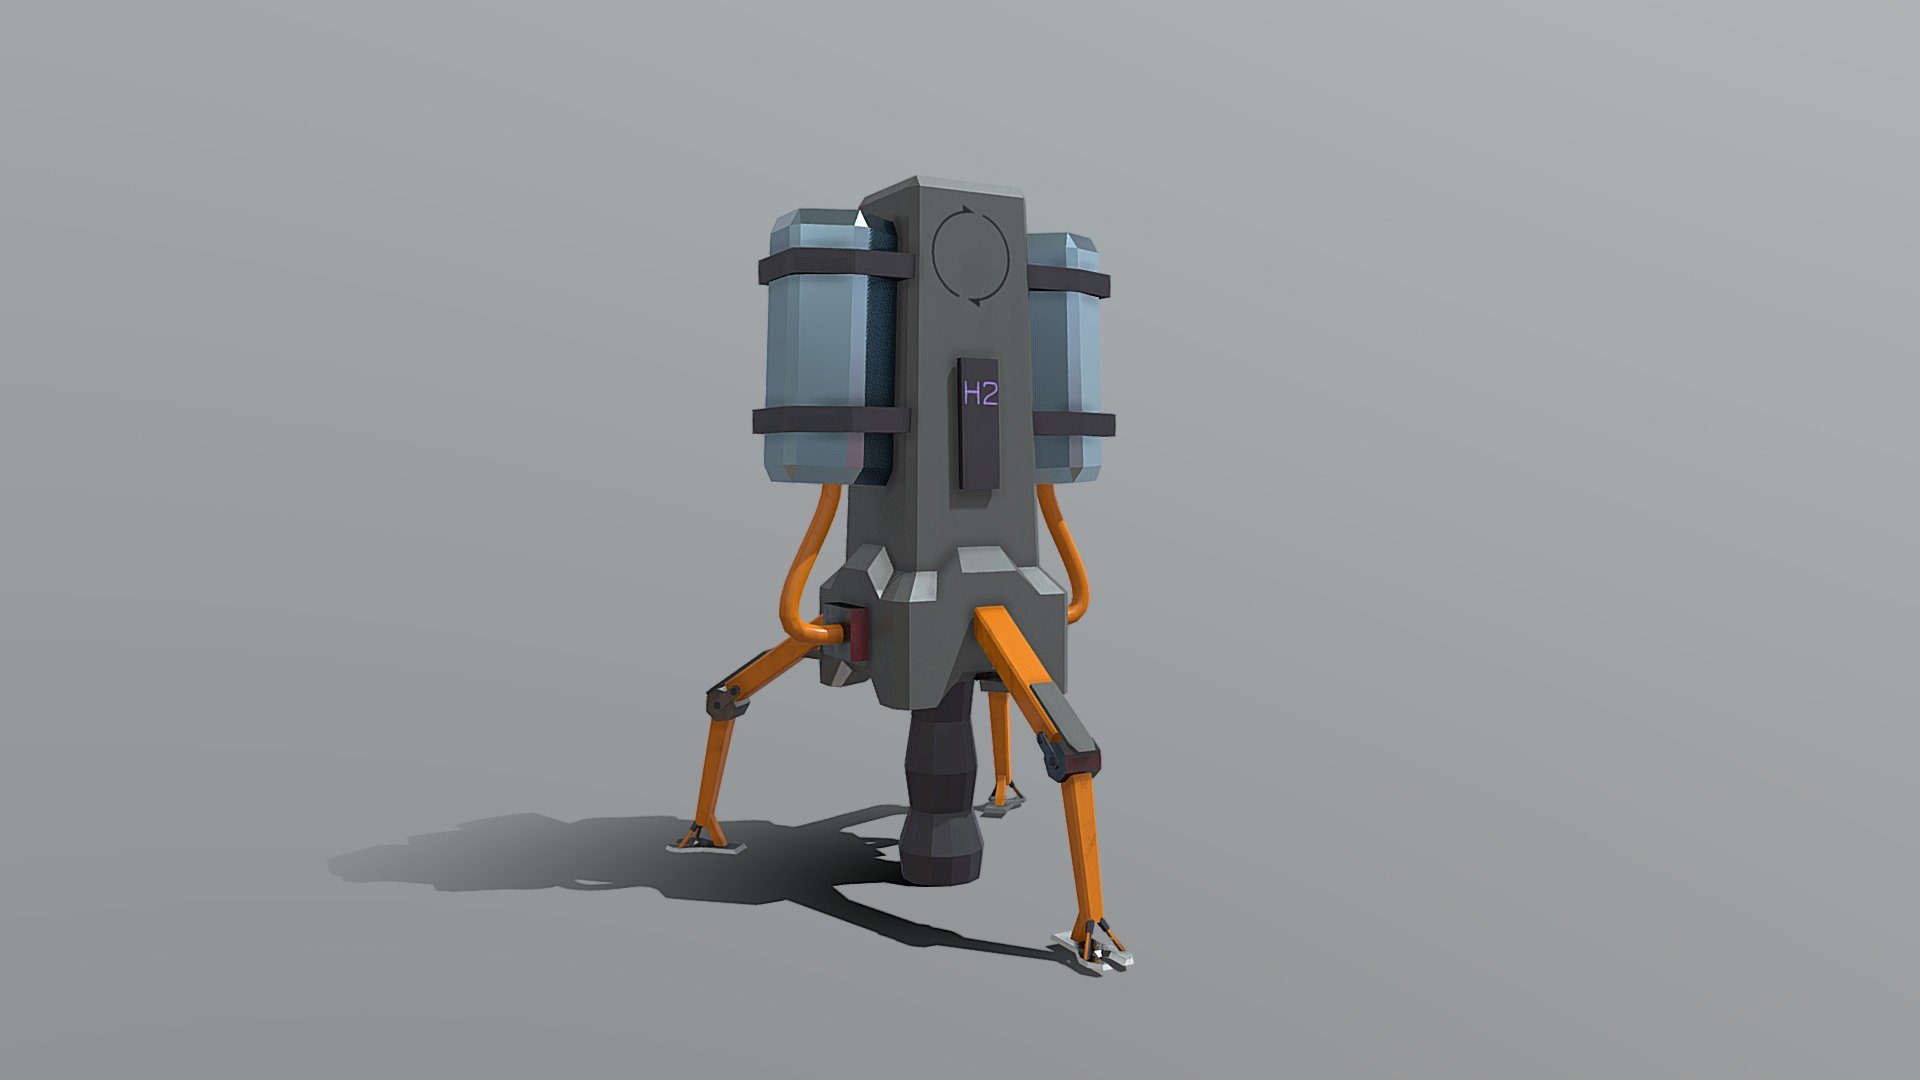 This is a Low Poly Ice Drill I made in Blender and textured in Substance Painter for a small Project i'm working on 3d model